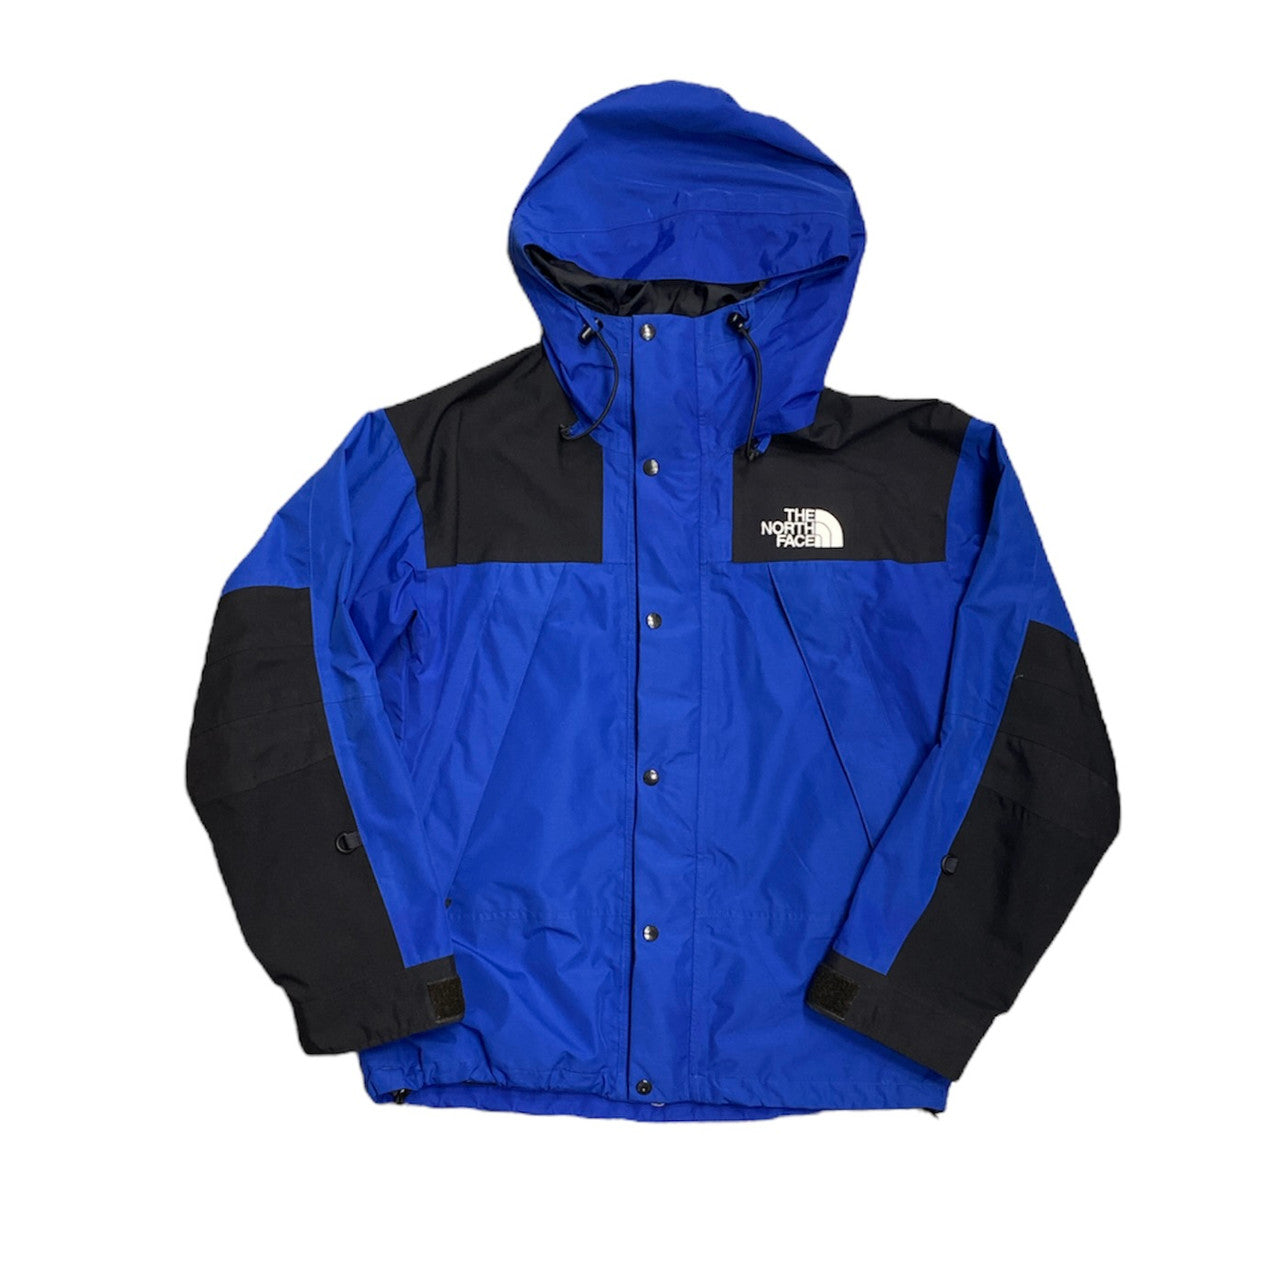 Vintage 90s The North Face Blue Shell Jacket